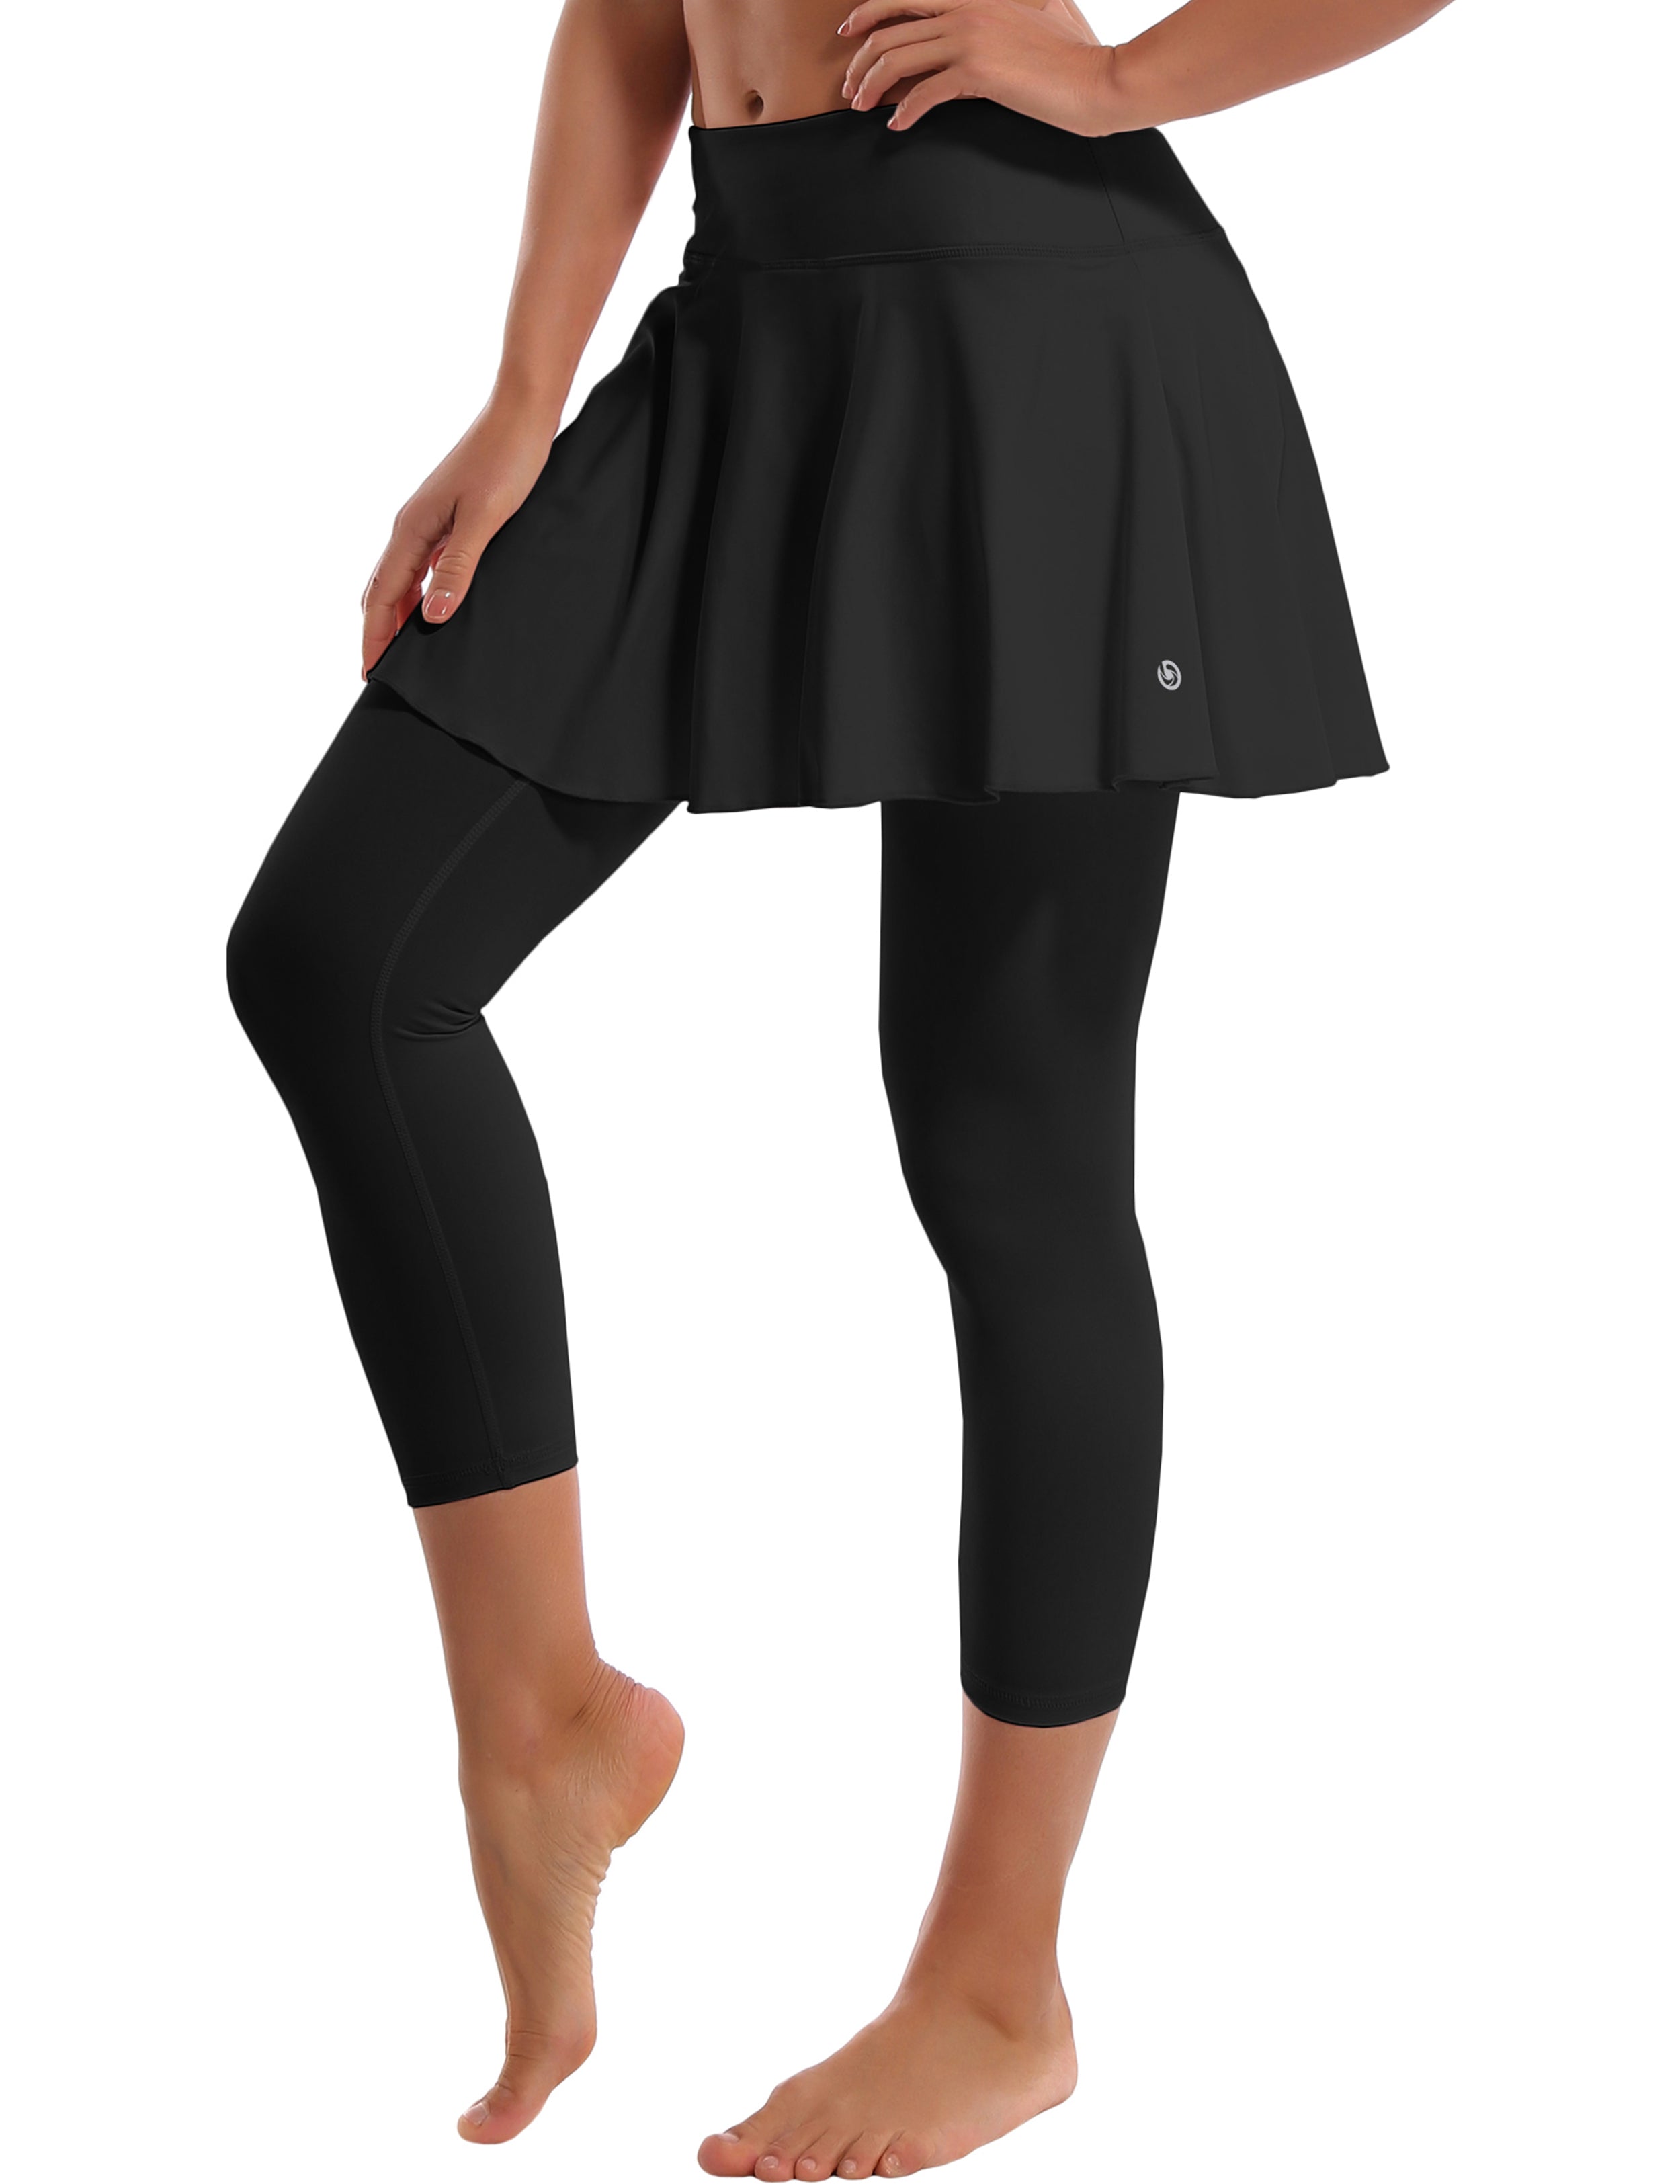 19" Capris Tennis Golf Skirted Leggings with Pockets black 80%Nylon/20%Spandex UPF 50+ sun protection Elastic closure Lightweight, Wrinkle Moisture wicking Quick drying Secure & comfortable two layer Hidden pocket